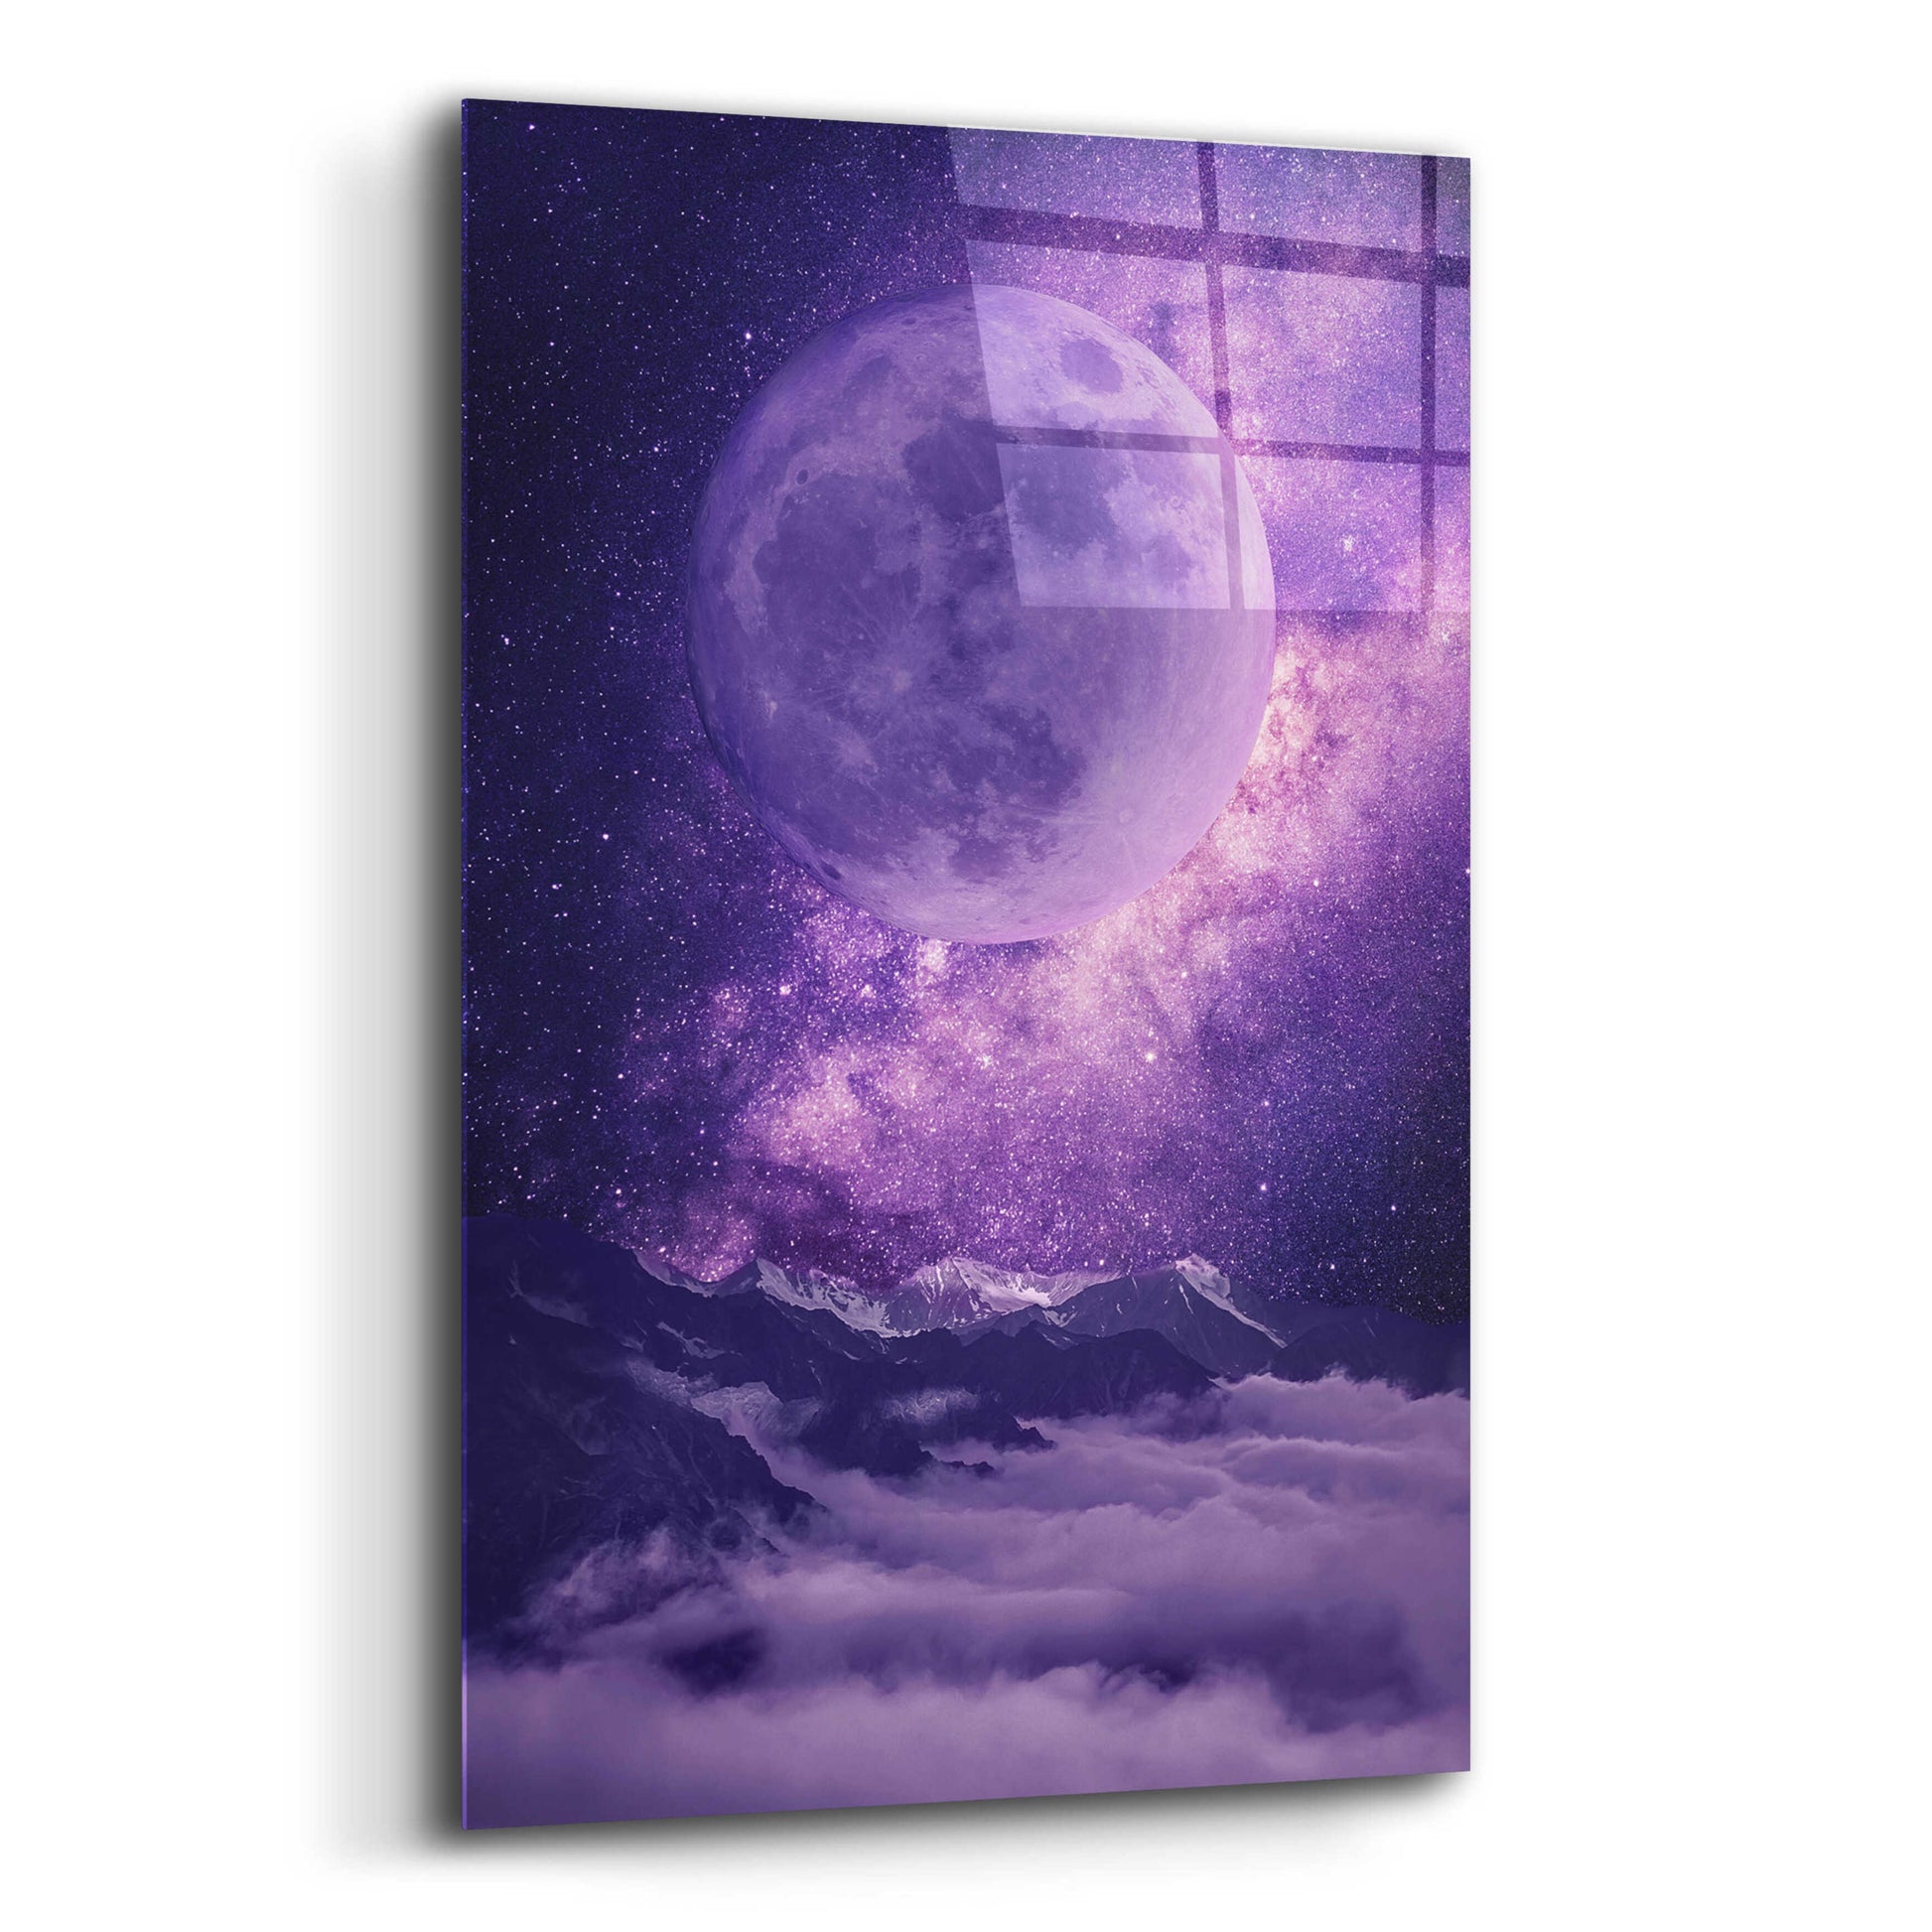 Epic Art 'Sublime Moonlight ' by Unknown Artist, Acrylic Glass Wall Art,16x24